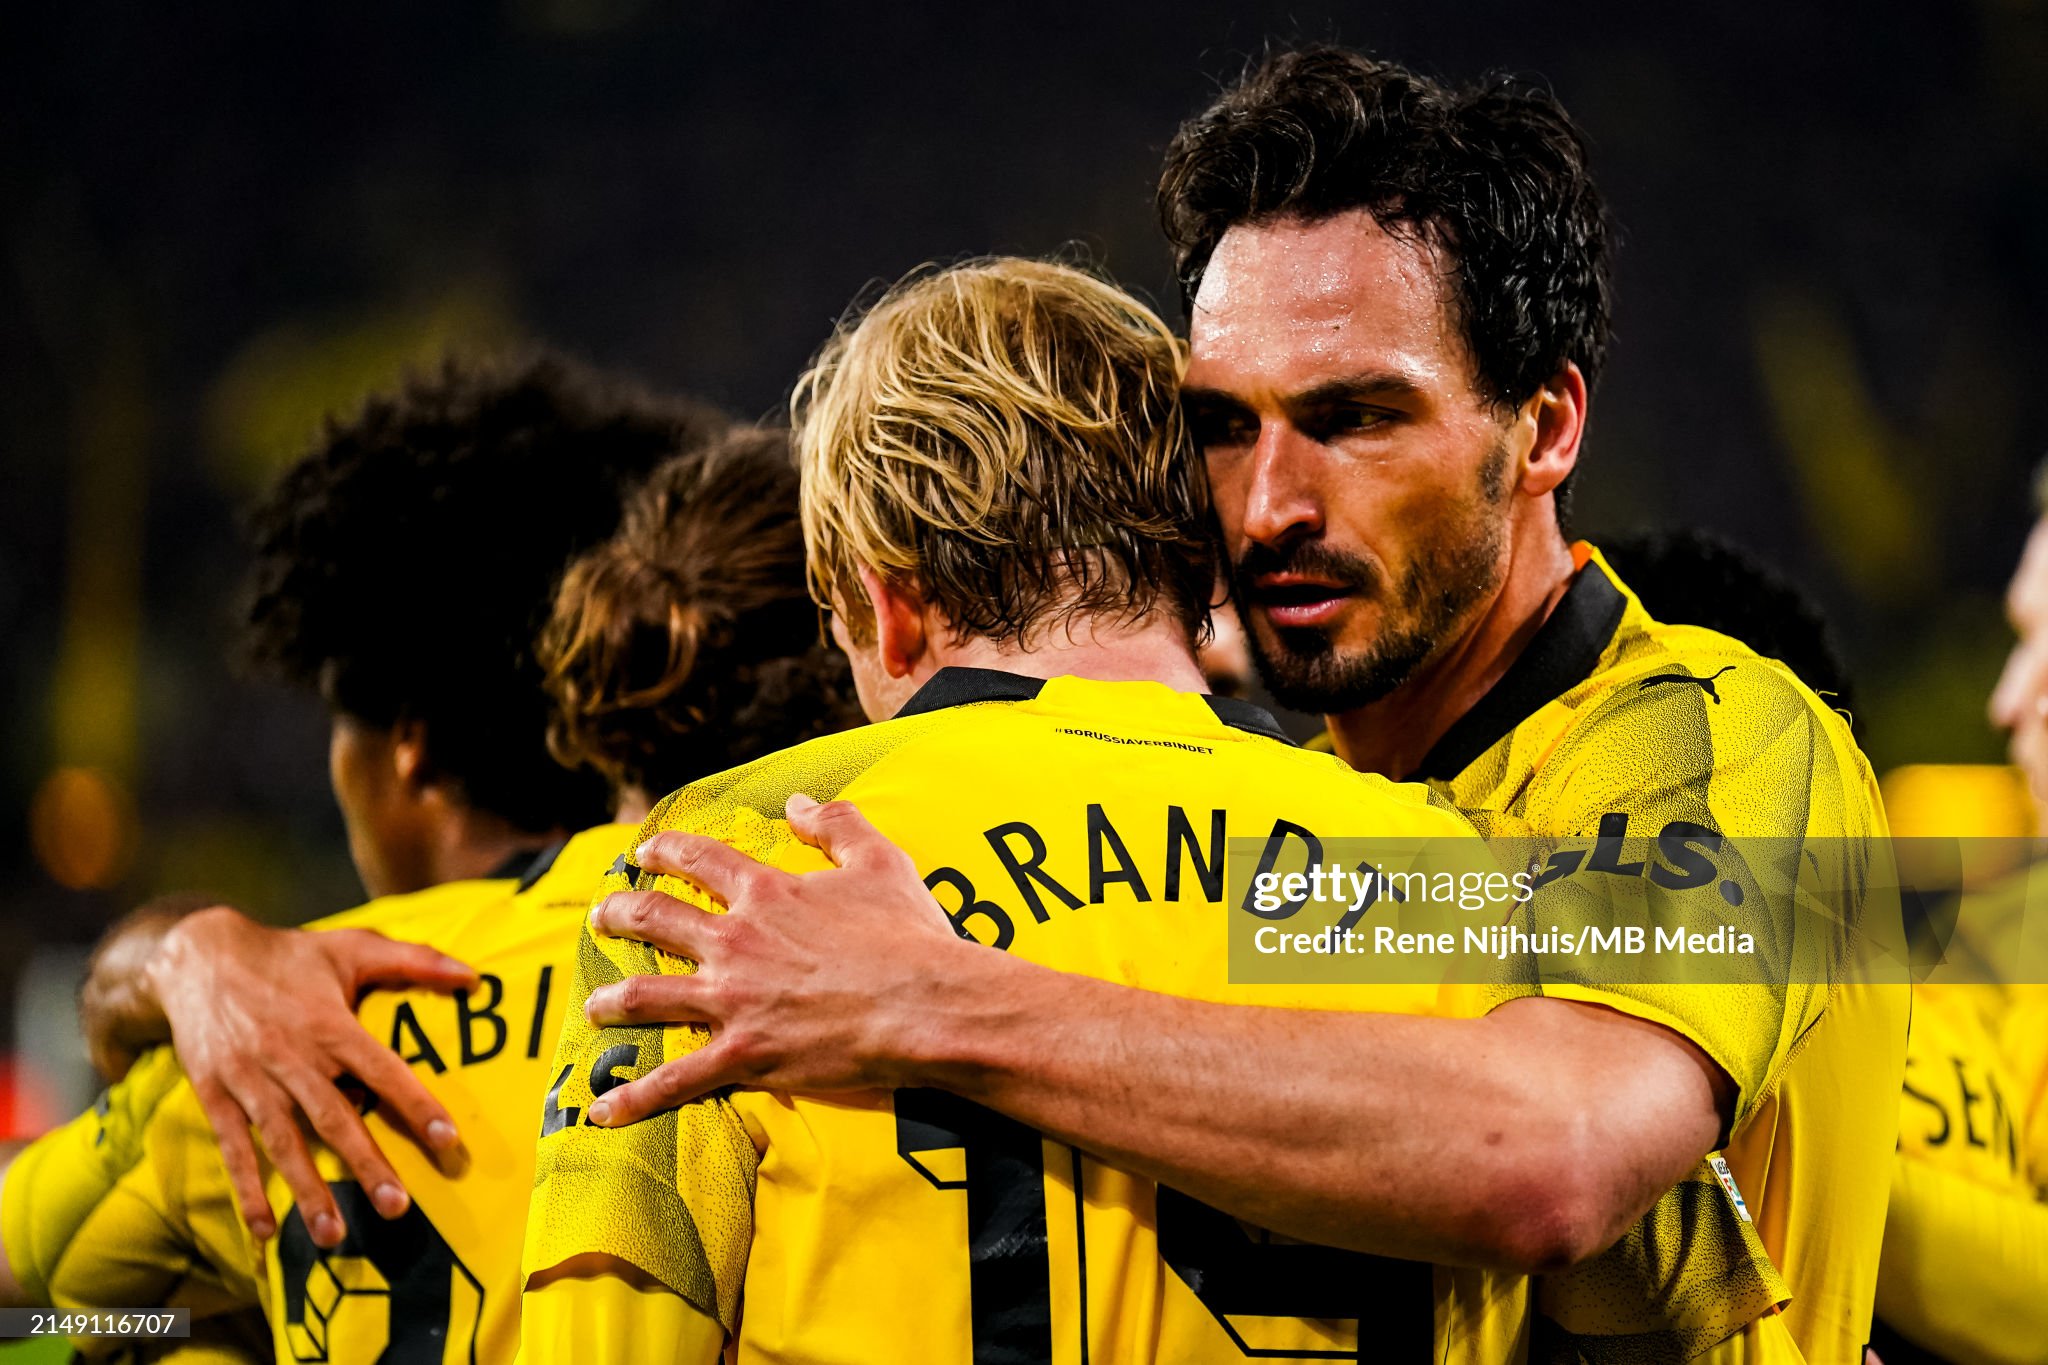 Hummels and the 'farmers' from Germany strike back hard at the Premier League